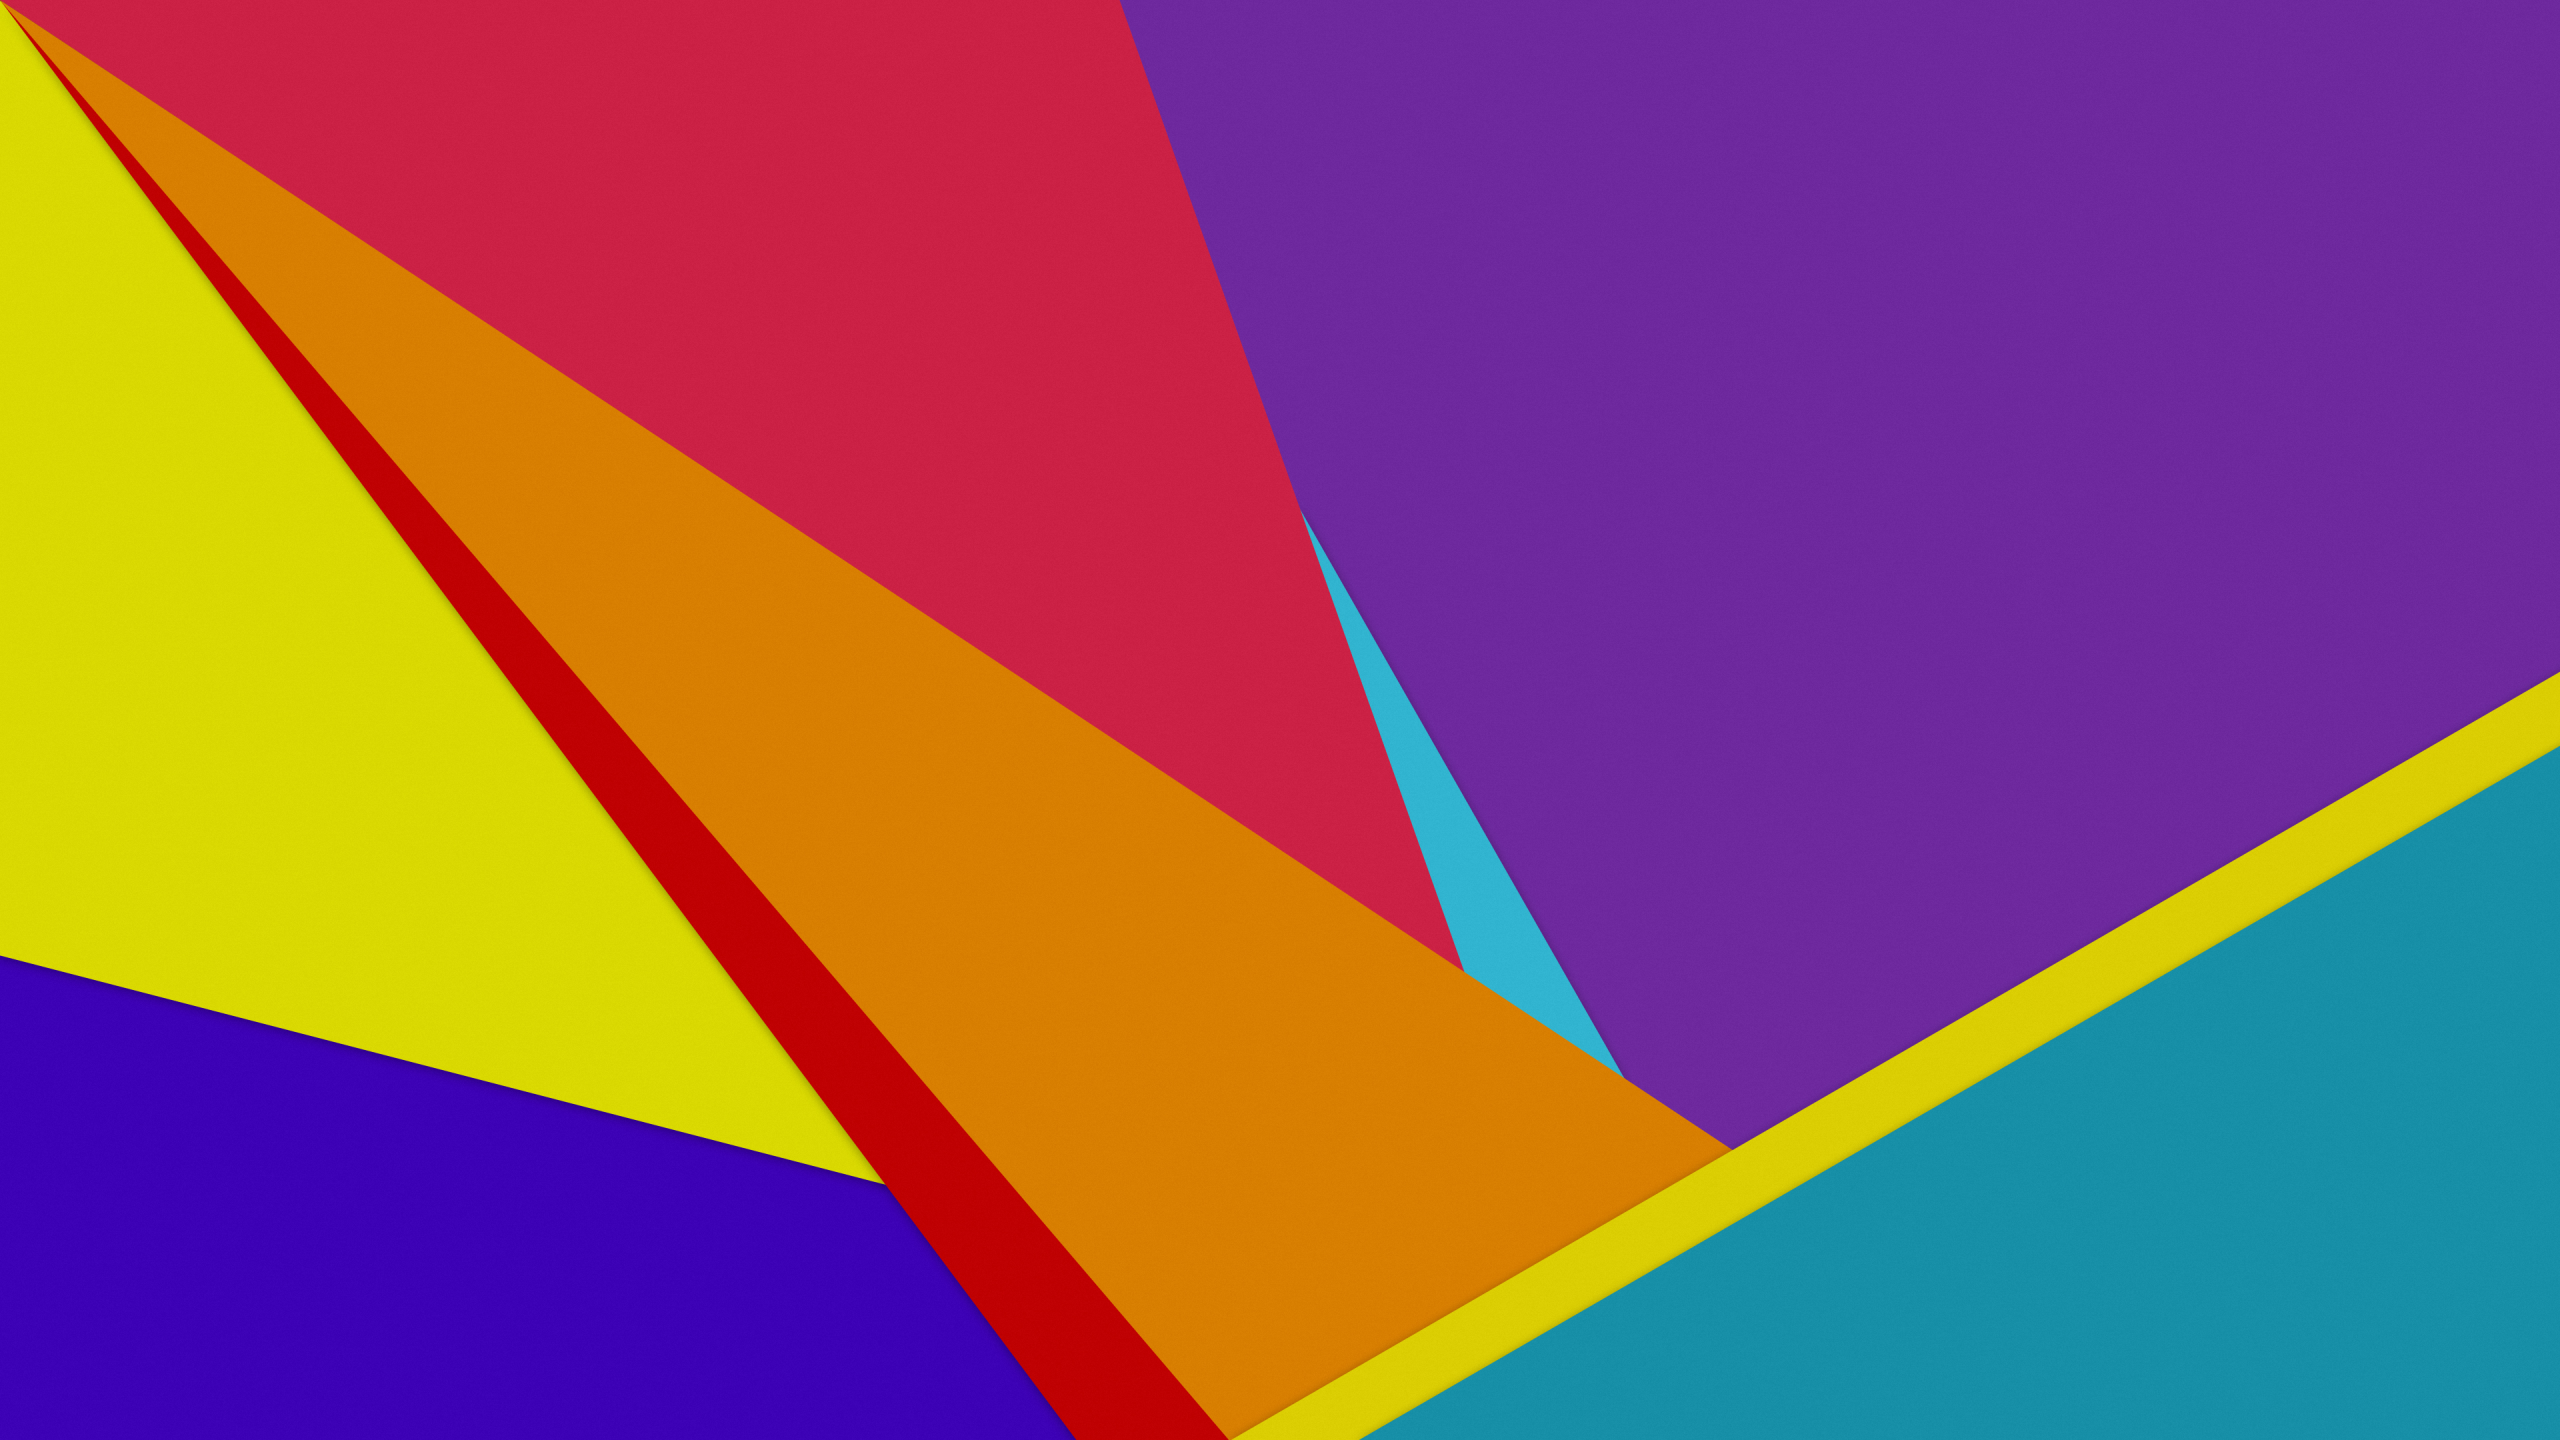 Material Design Wallpaper 4K, Multicolor, Colorful, Abstract, #6721